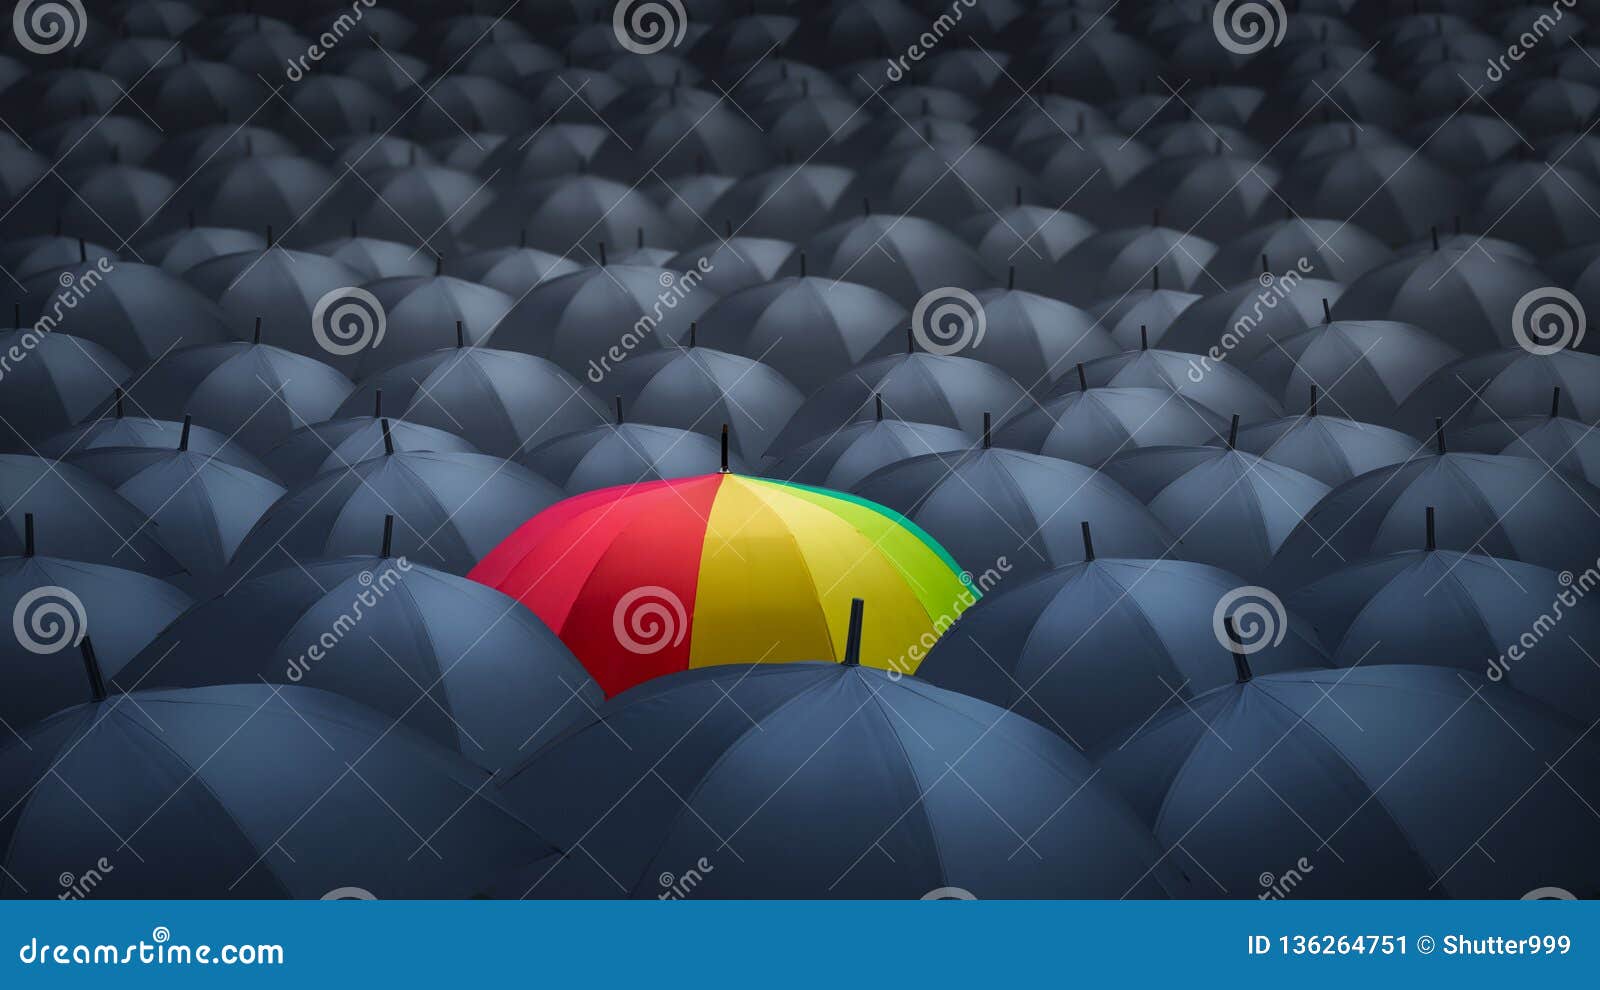 businessman with colorful rainbow umbrella among others, unique